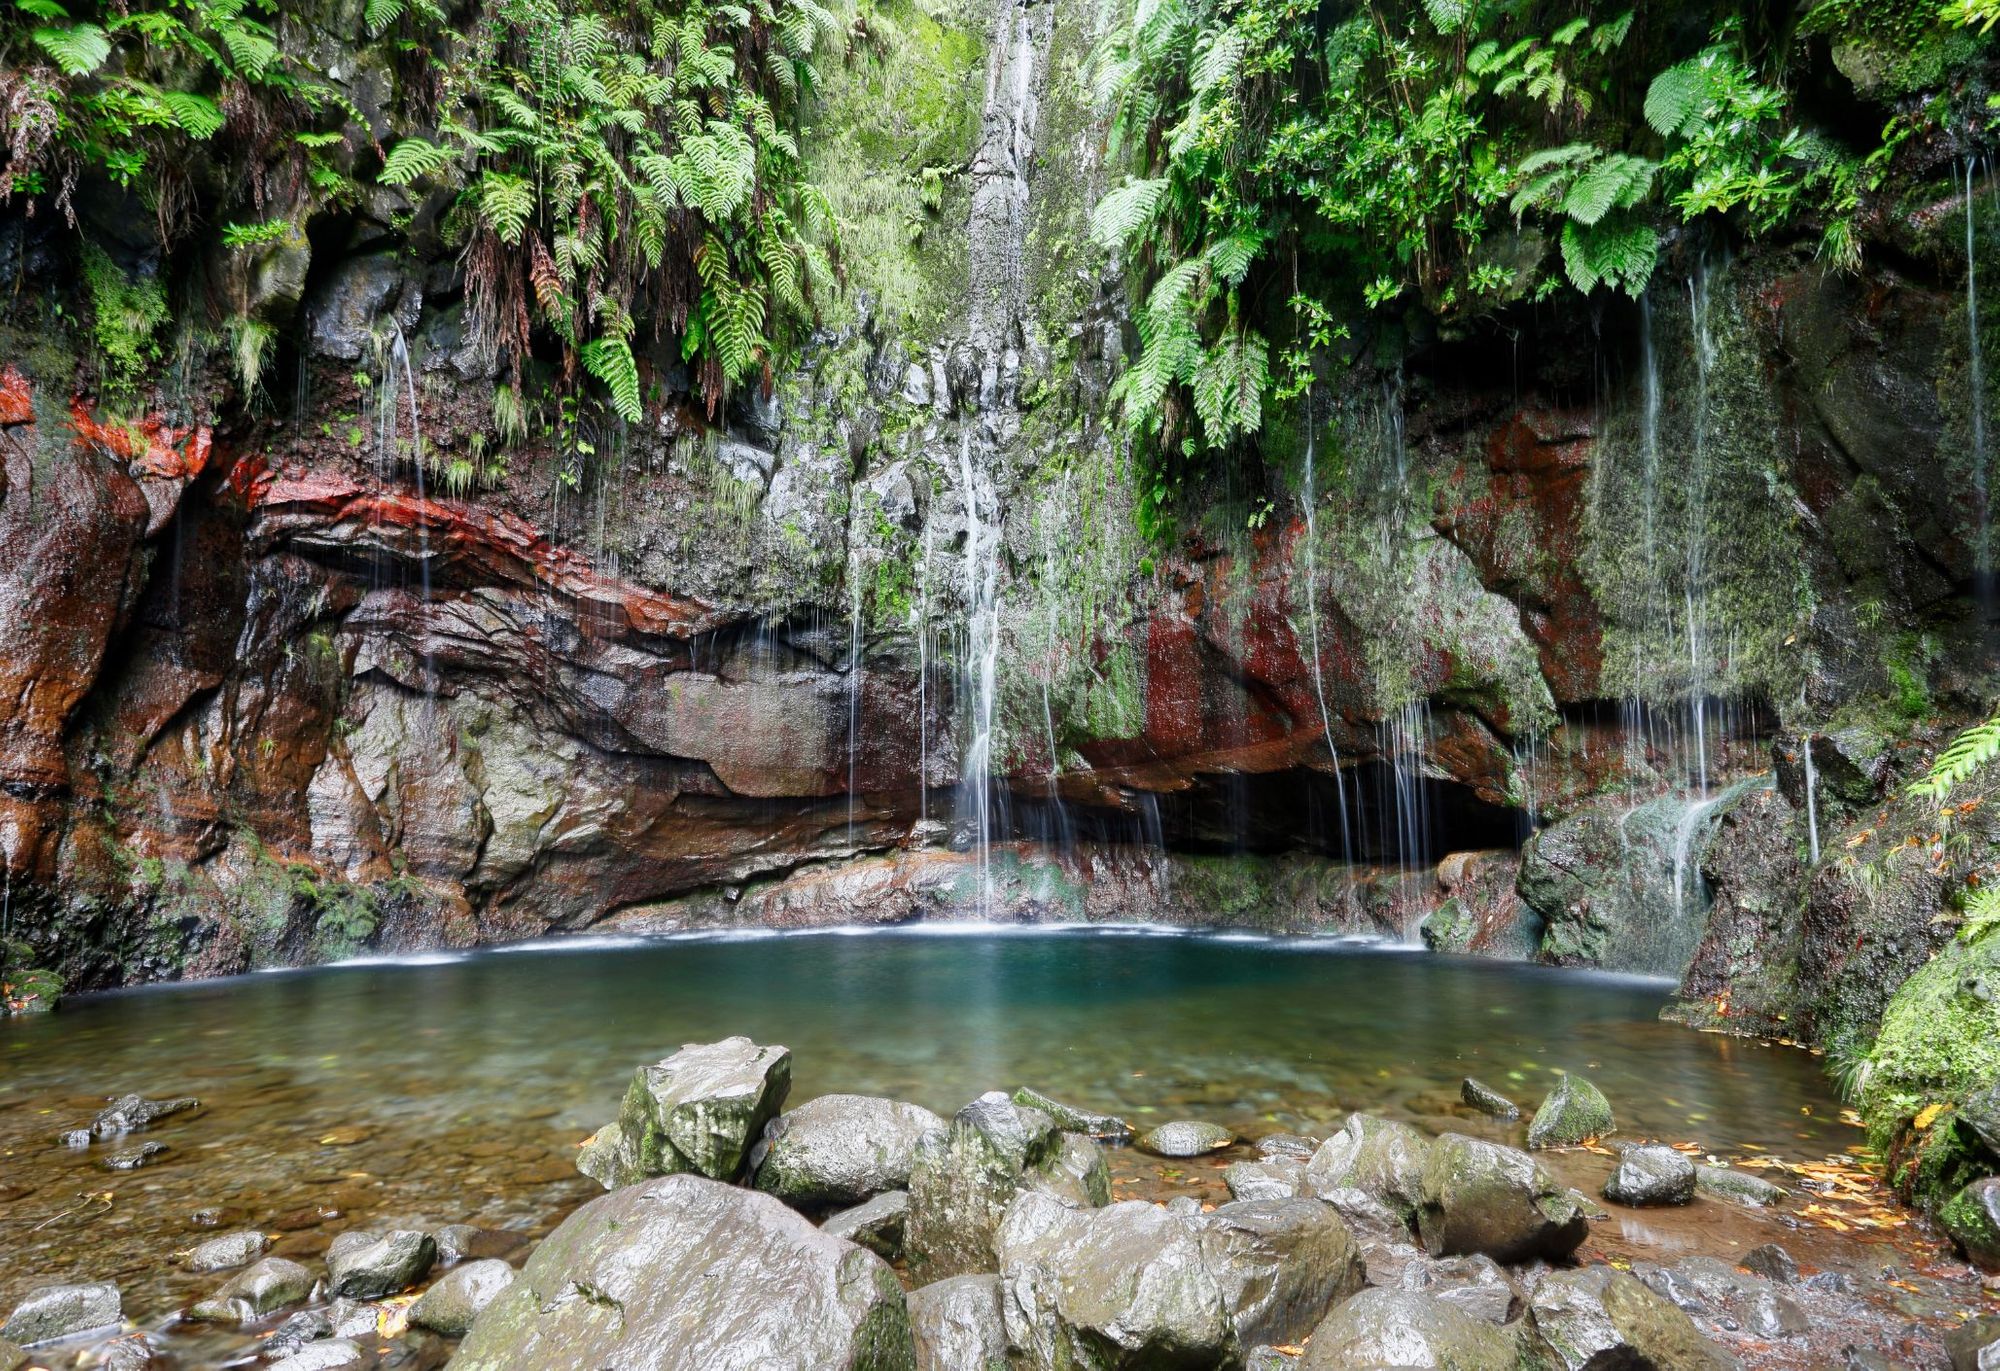 A waterfall on the 25 Fontes walk, which falls into this dreamy basin below. Photo: Getty